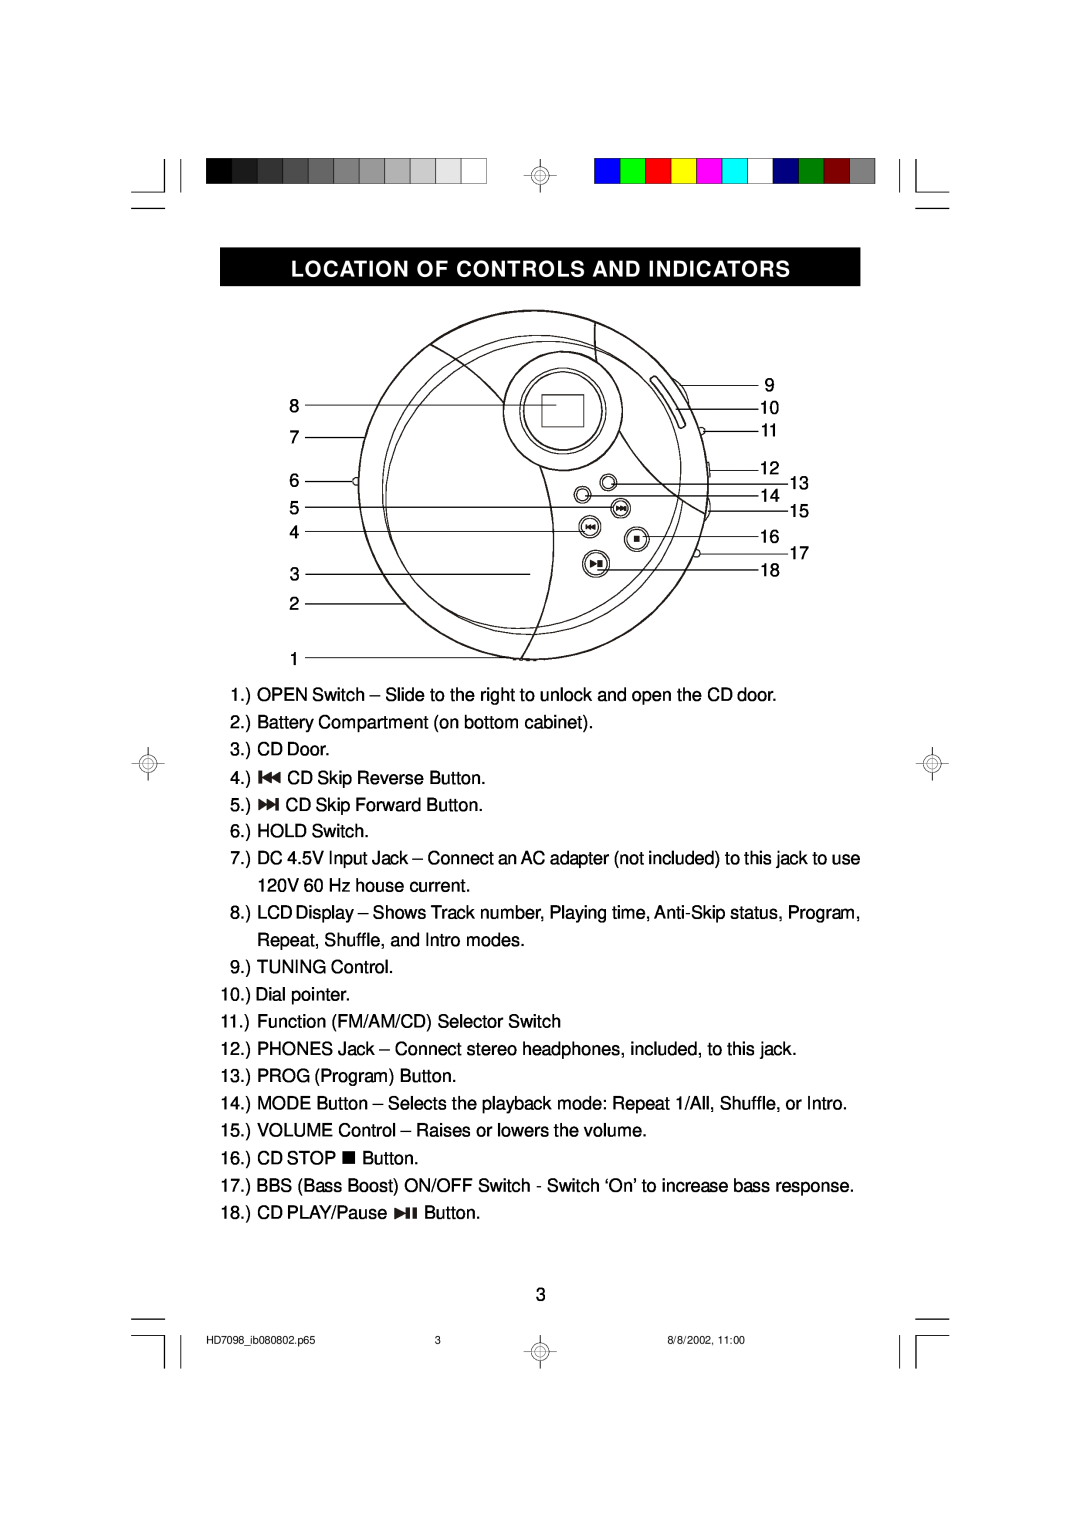 Emerson HD7098 owner manual Location Of Controls And Indicators 